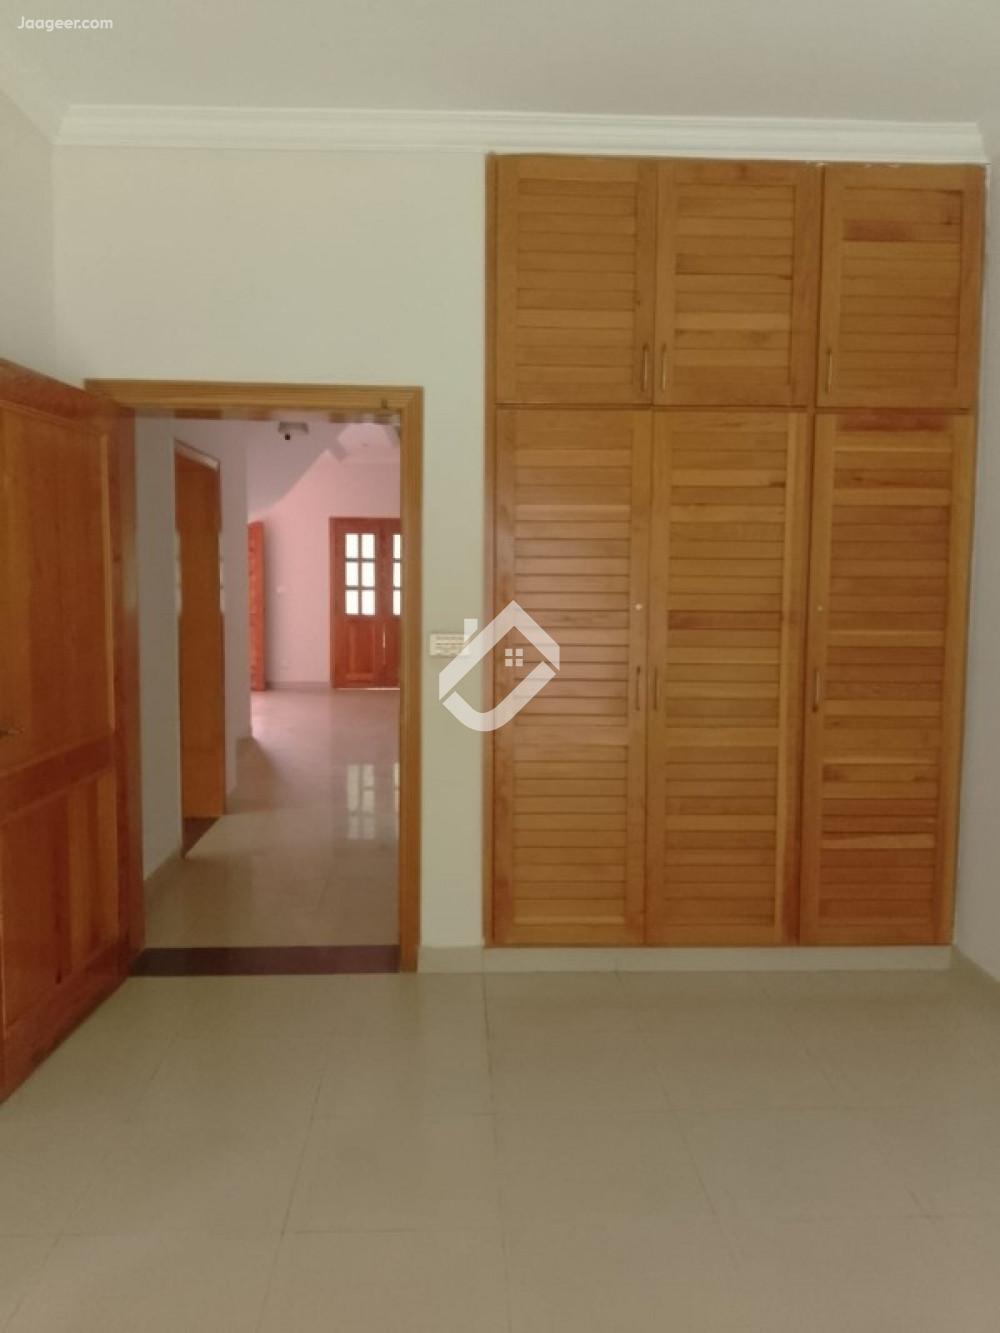 Main image 10 Marla Double Storey House For Sale In Bahria Town Phase-2 Bahria Town, Rawalpindi